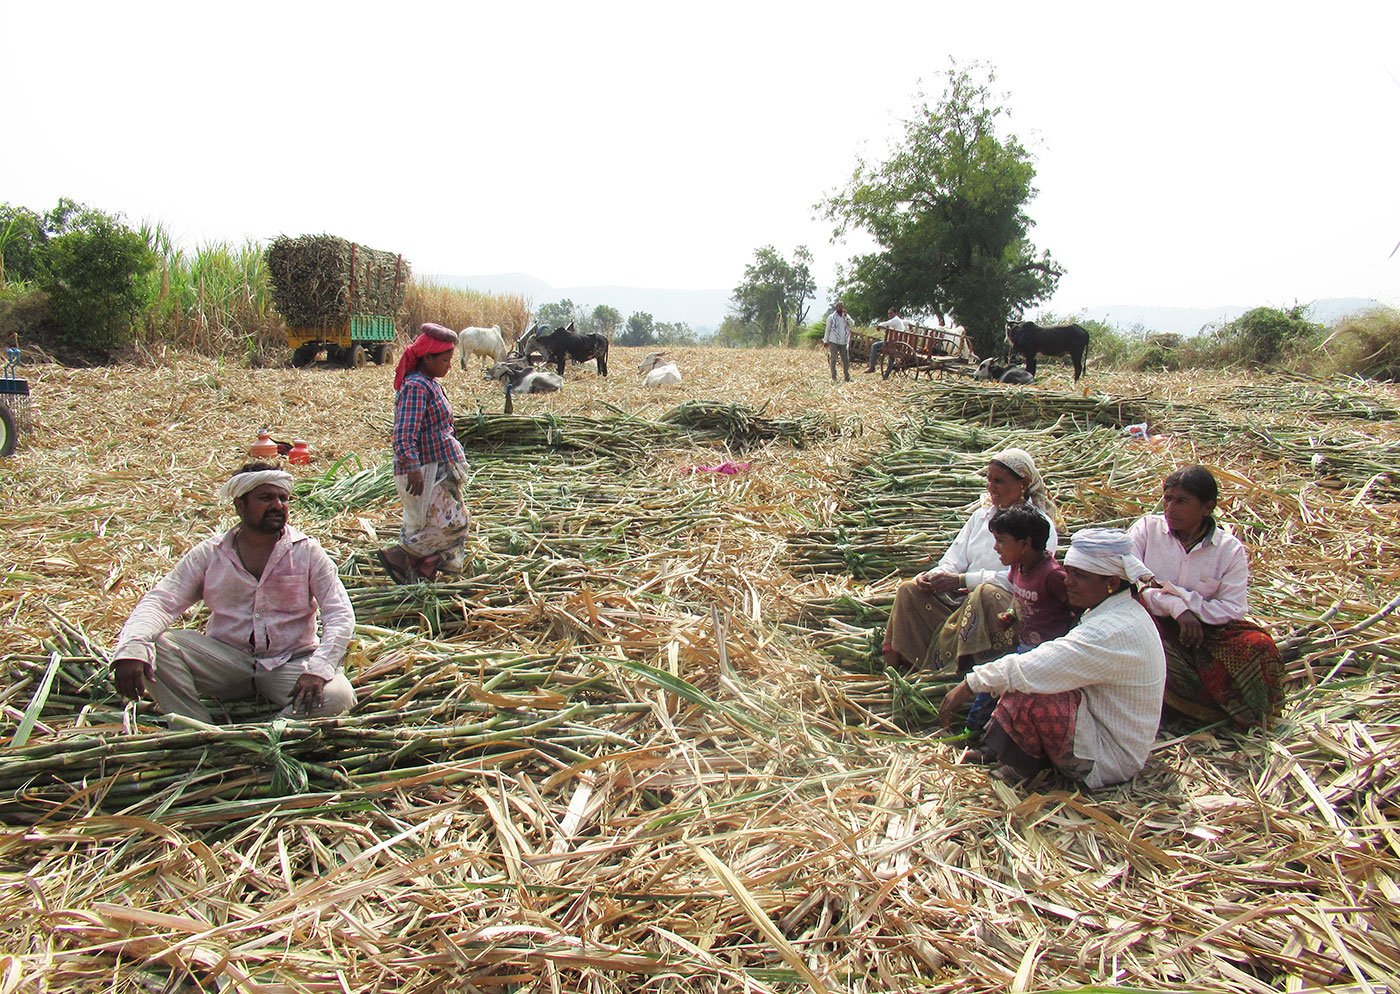 For the lakhs of labourers hired by the sugar factories of western Maharashtra, social distancing is a distant dream. Many in Sangli district are still chopping cane in unhygienic conditions despite the fear of Covid-19

